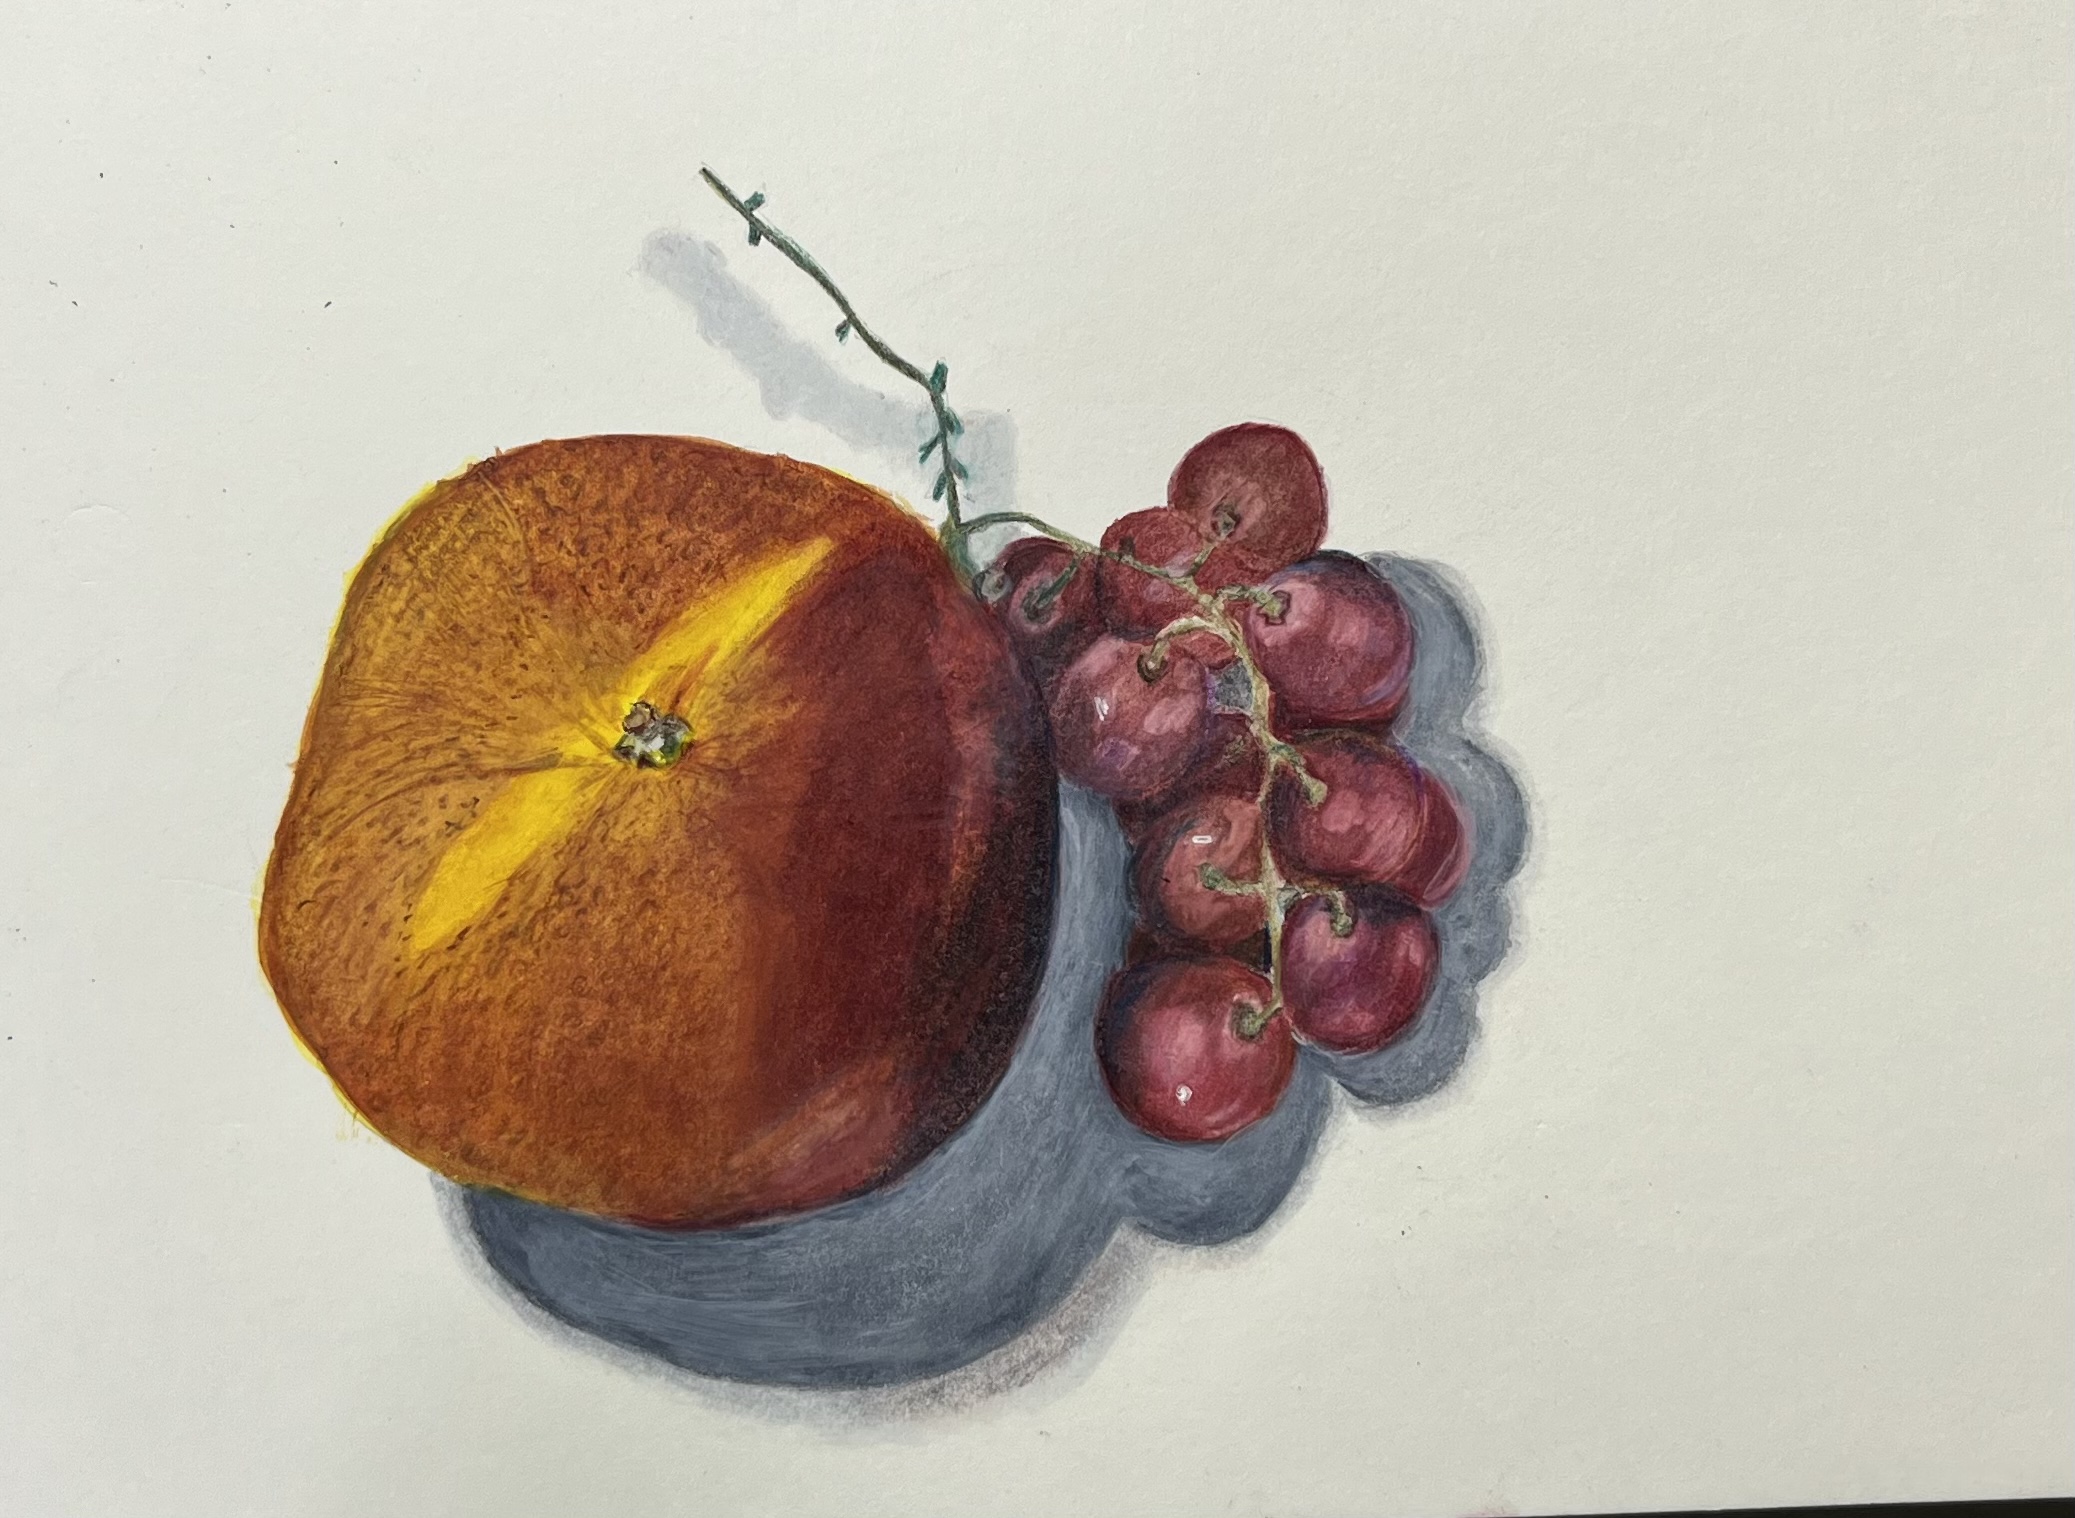 Nectarine and grapes, study in realism